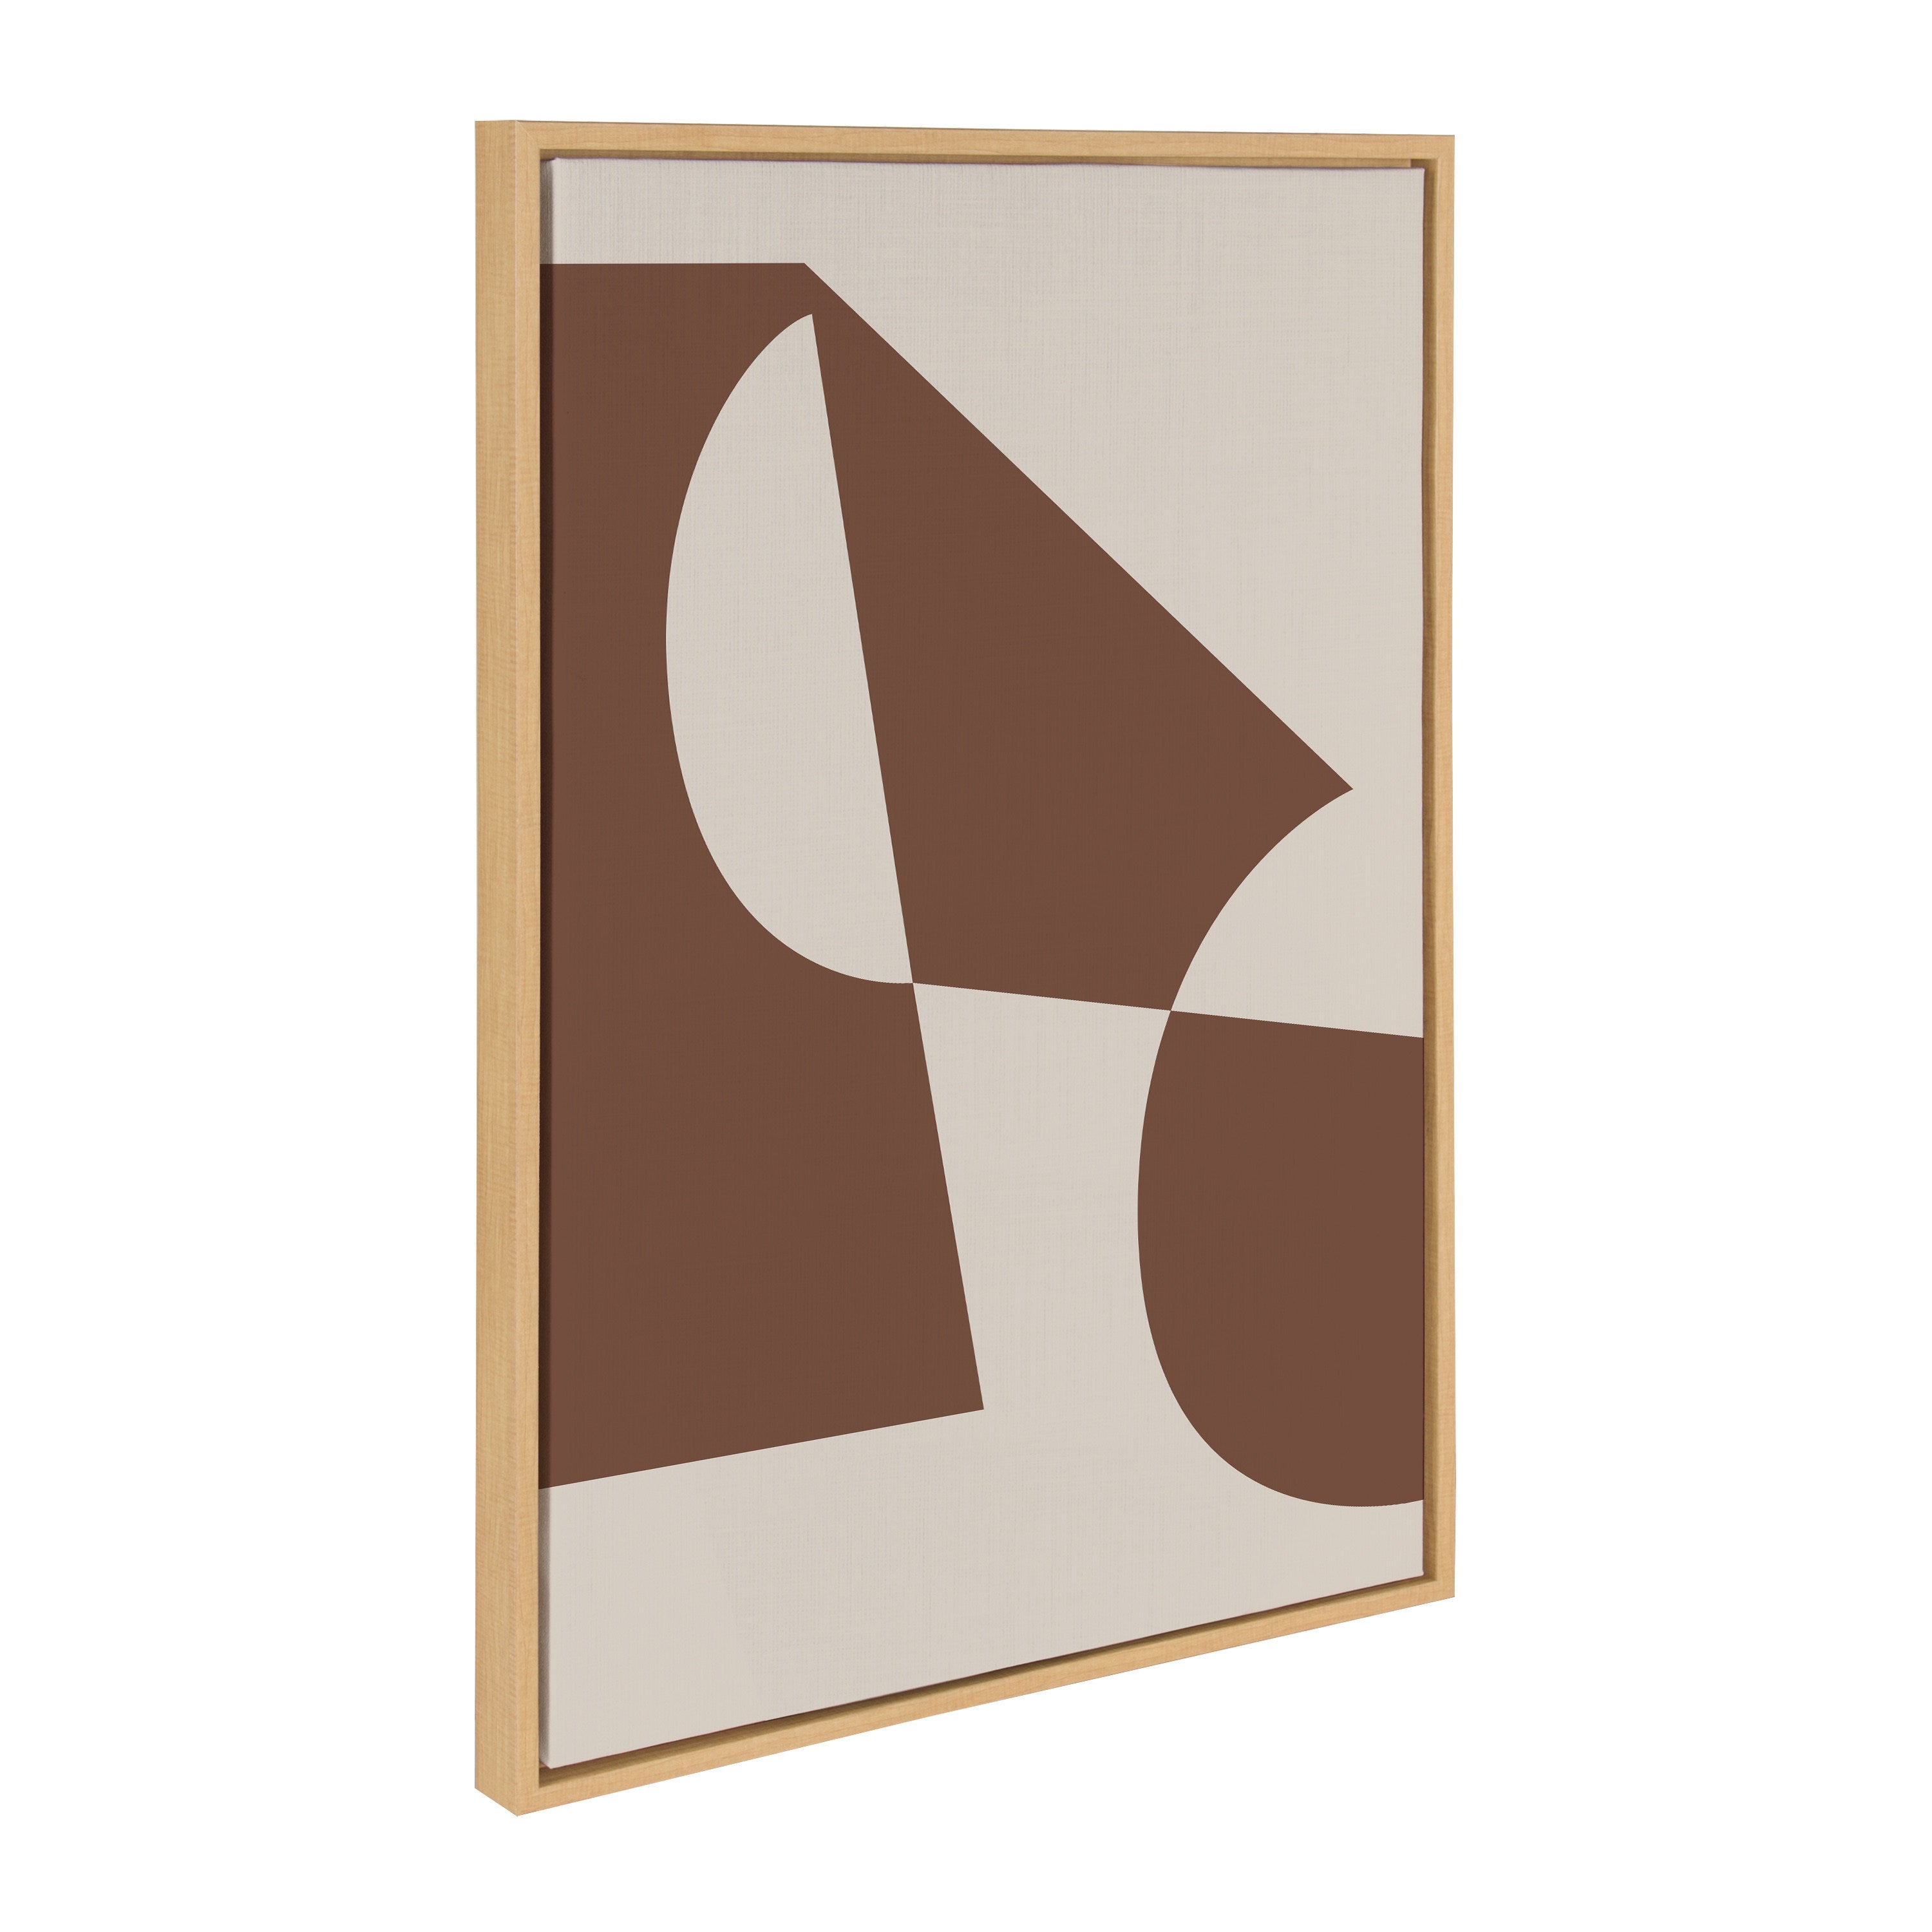 Sylvie Eye Catching Sleek Abstract 5 Brown and Beige Framed Canvas by The Creative Bunch Studio